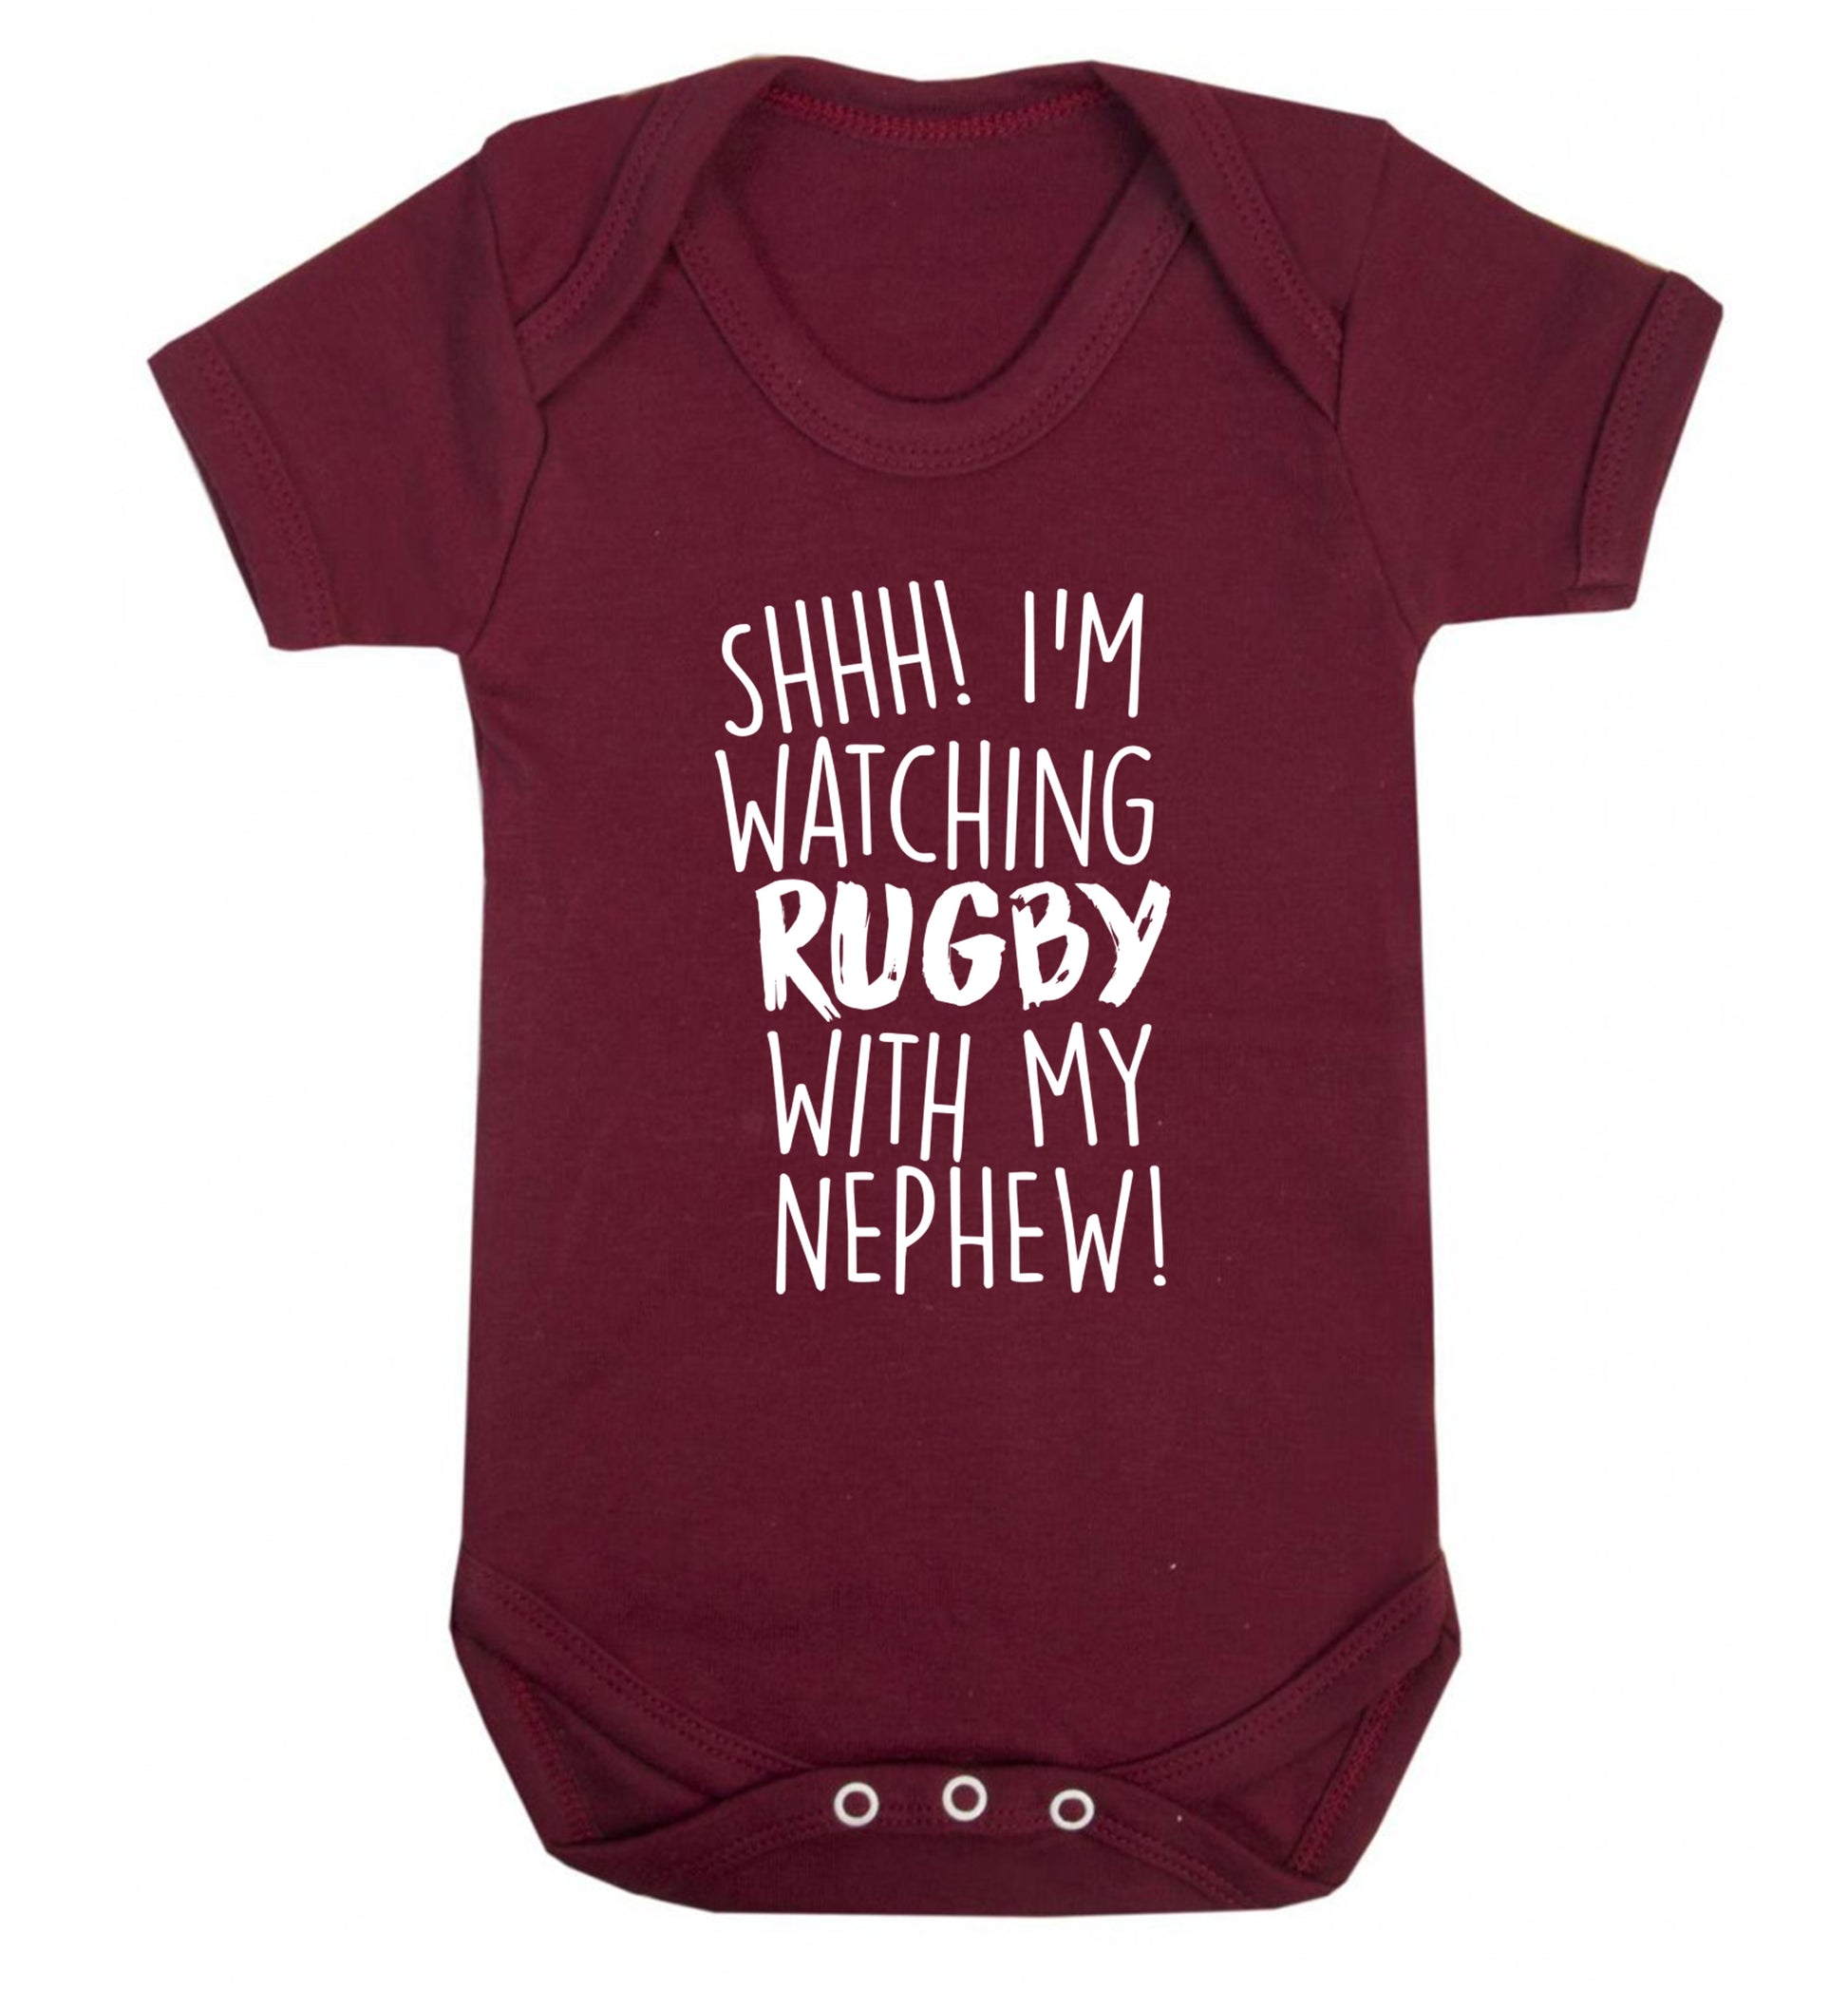 Shh.. I'm watching rugby with my nephew Baby Vest maroon 18-24 months